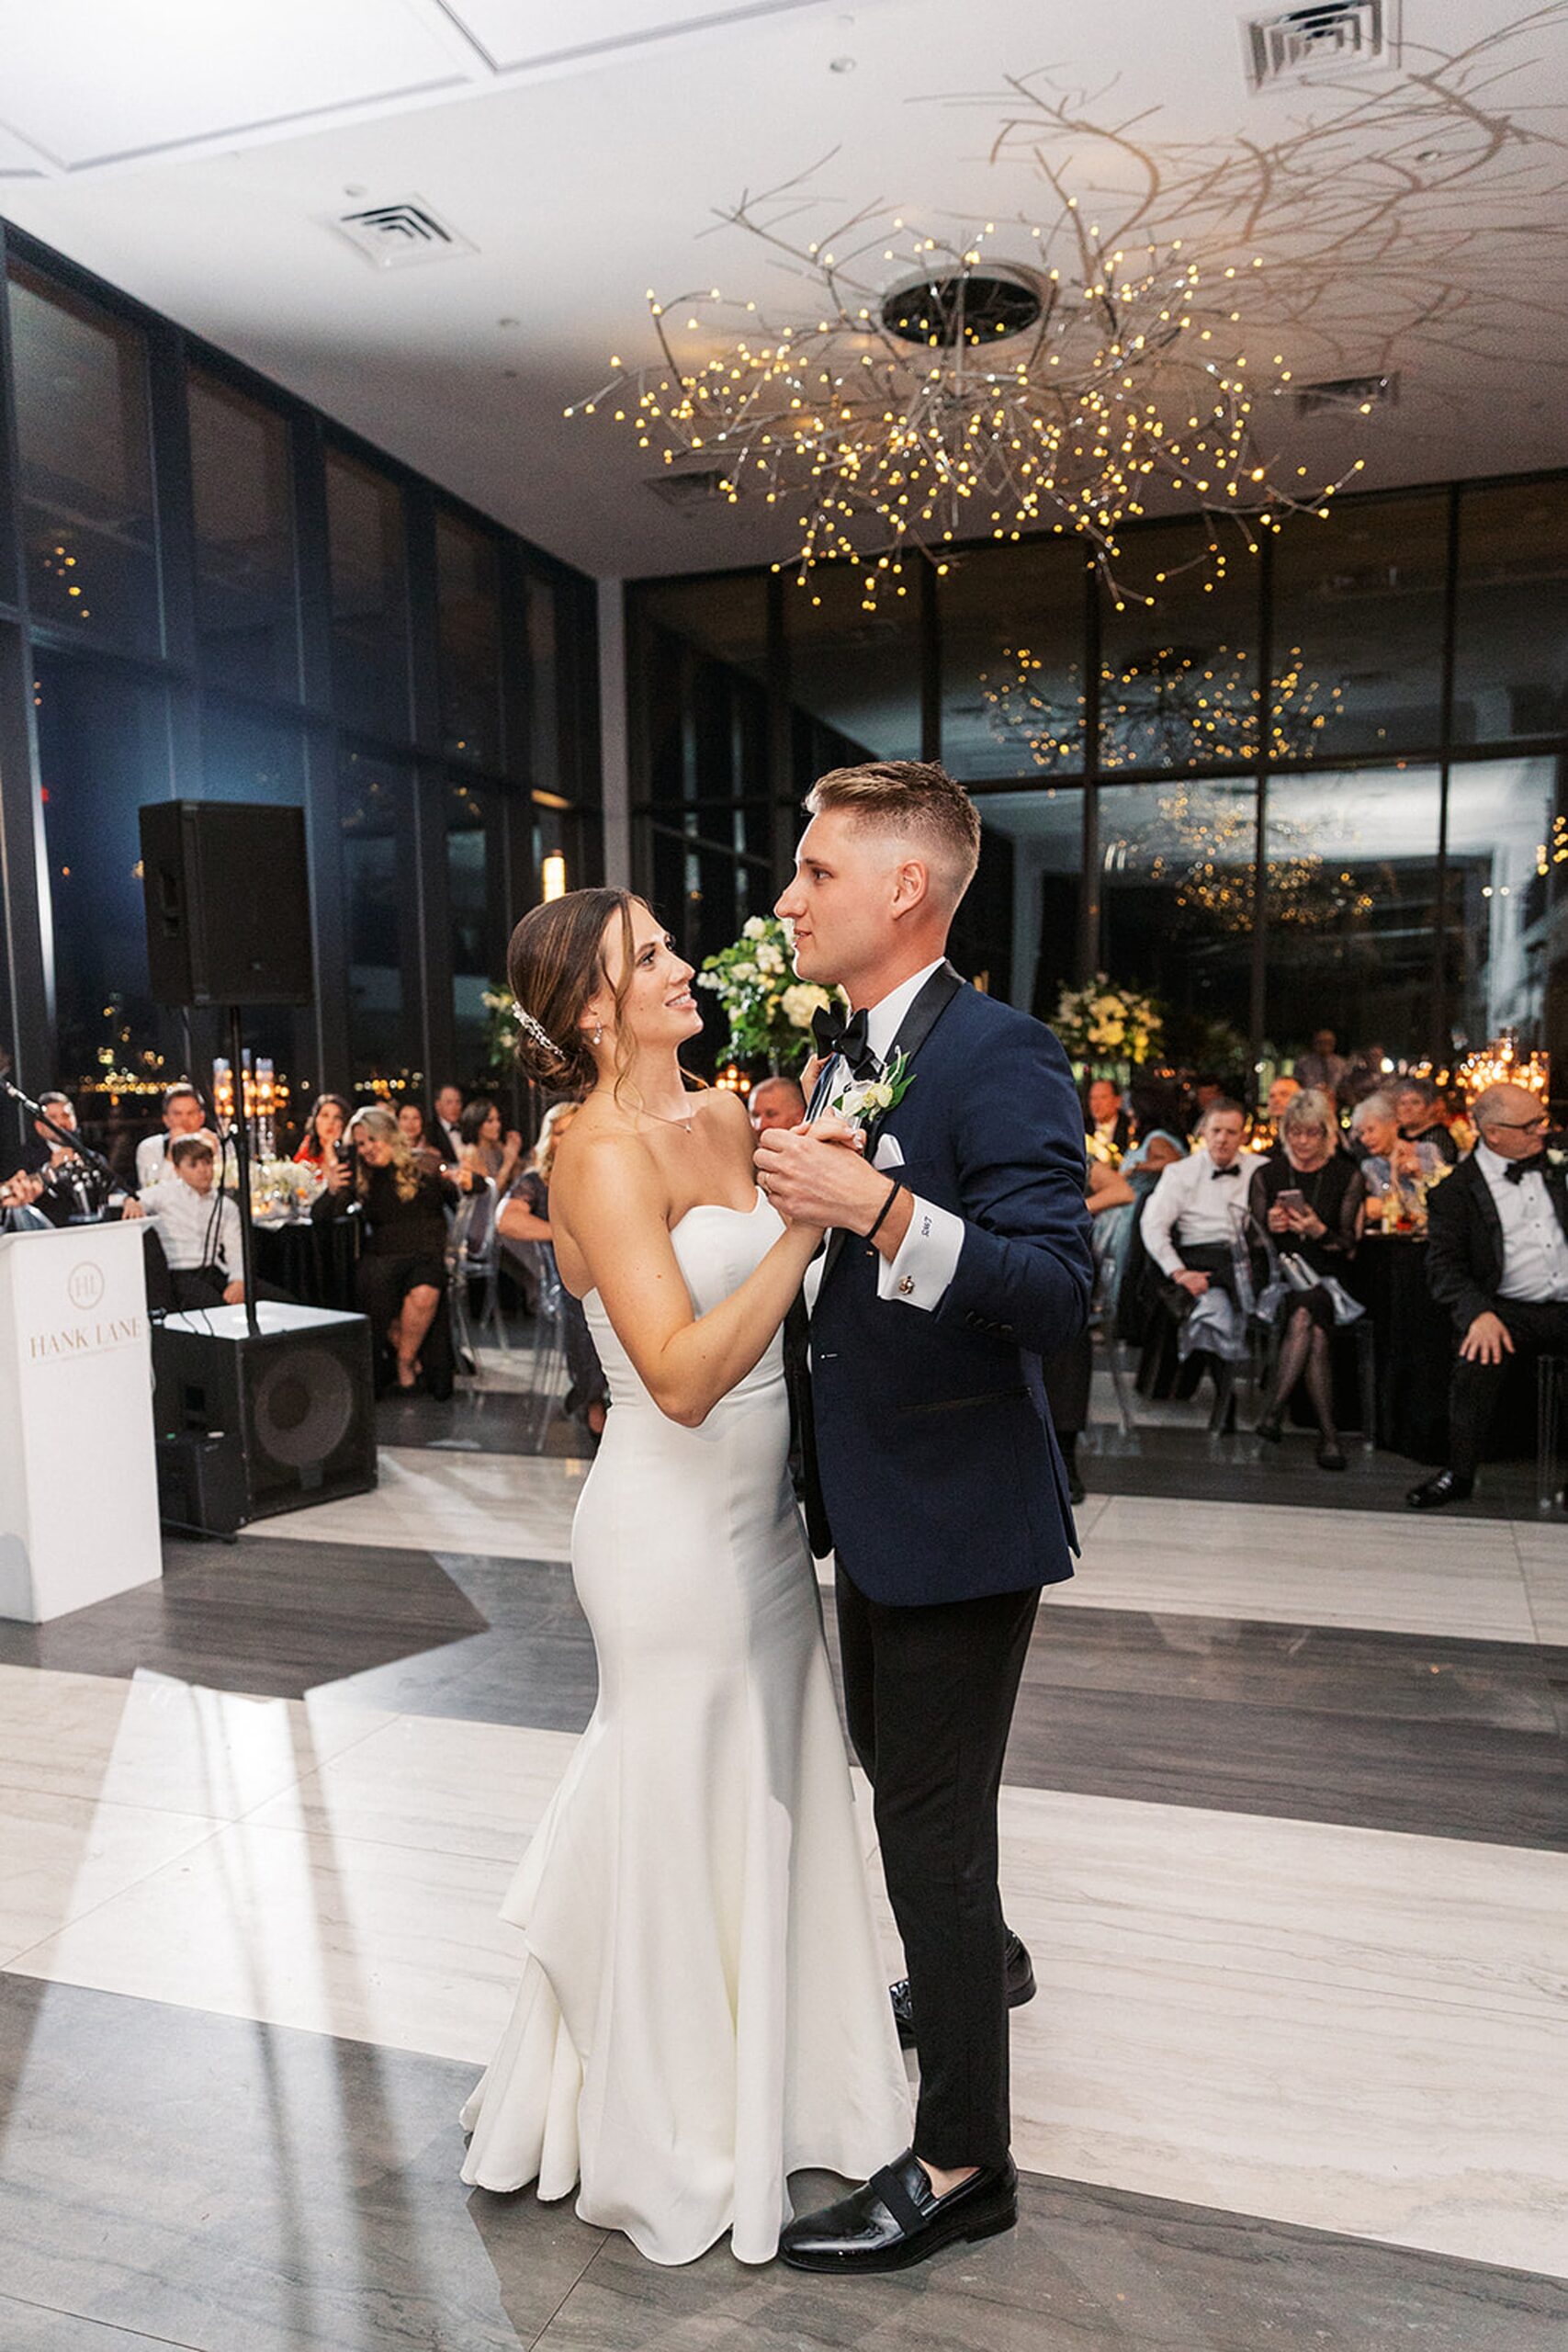 Newlyweds dance together for the first time surrounded by their guests at a Hudson House wedding